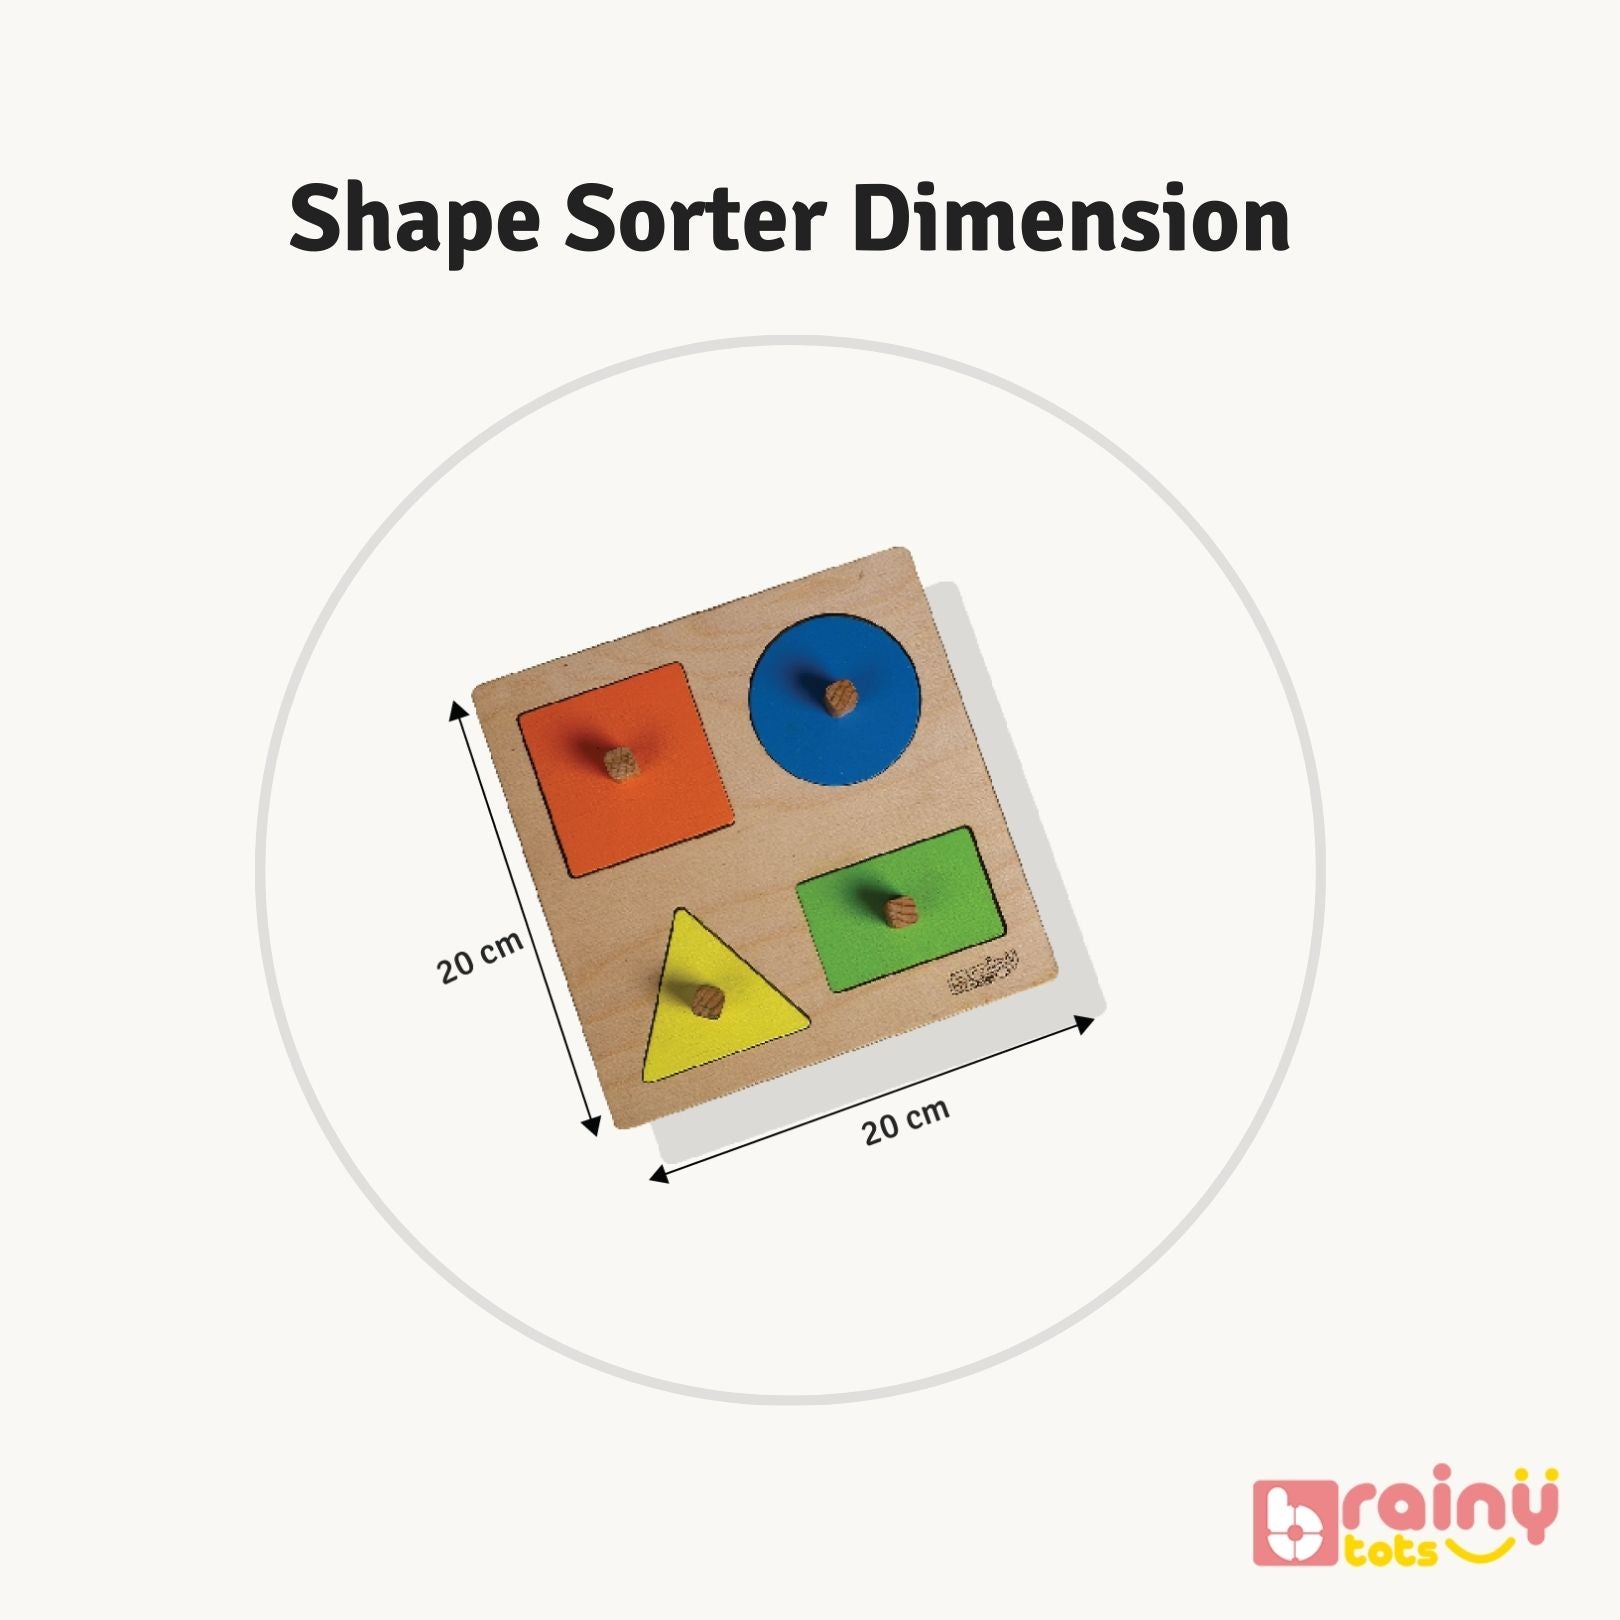 Dimensions of our Shape Sorter, designed for babies aged 8 months and up. This Montessori toy includes various shapes and sizes to promote problem-solving skills, shape recognition, and hand-eye coordination. Safe and durable, it supports early learning, cognitive development, and interactive play.